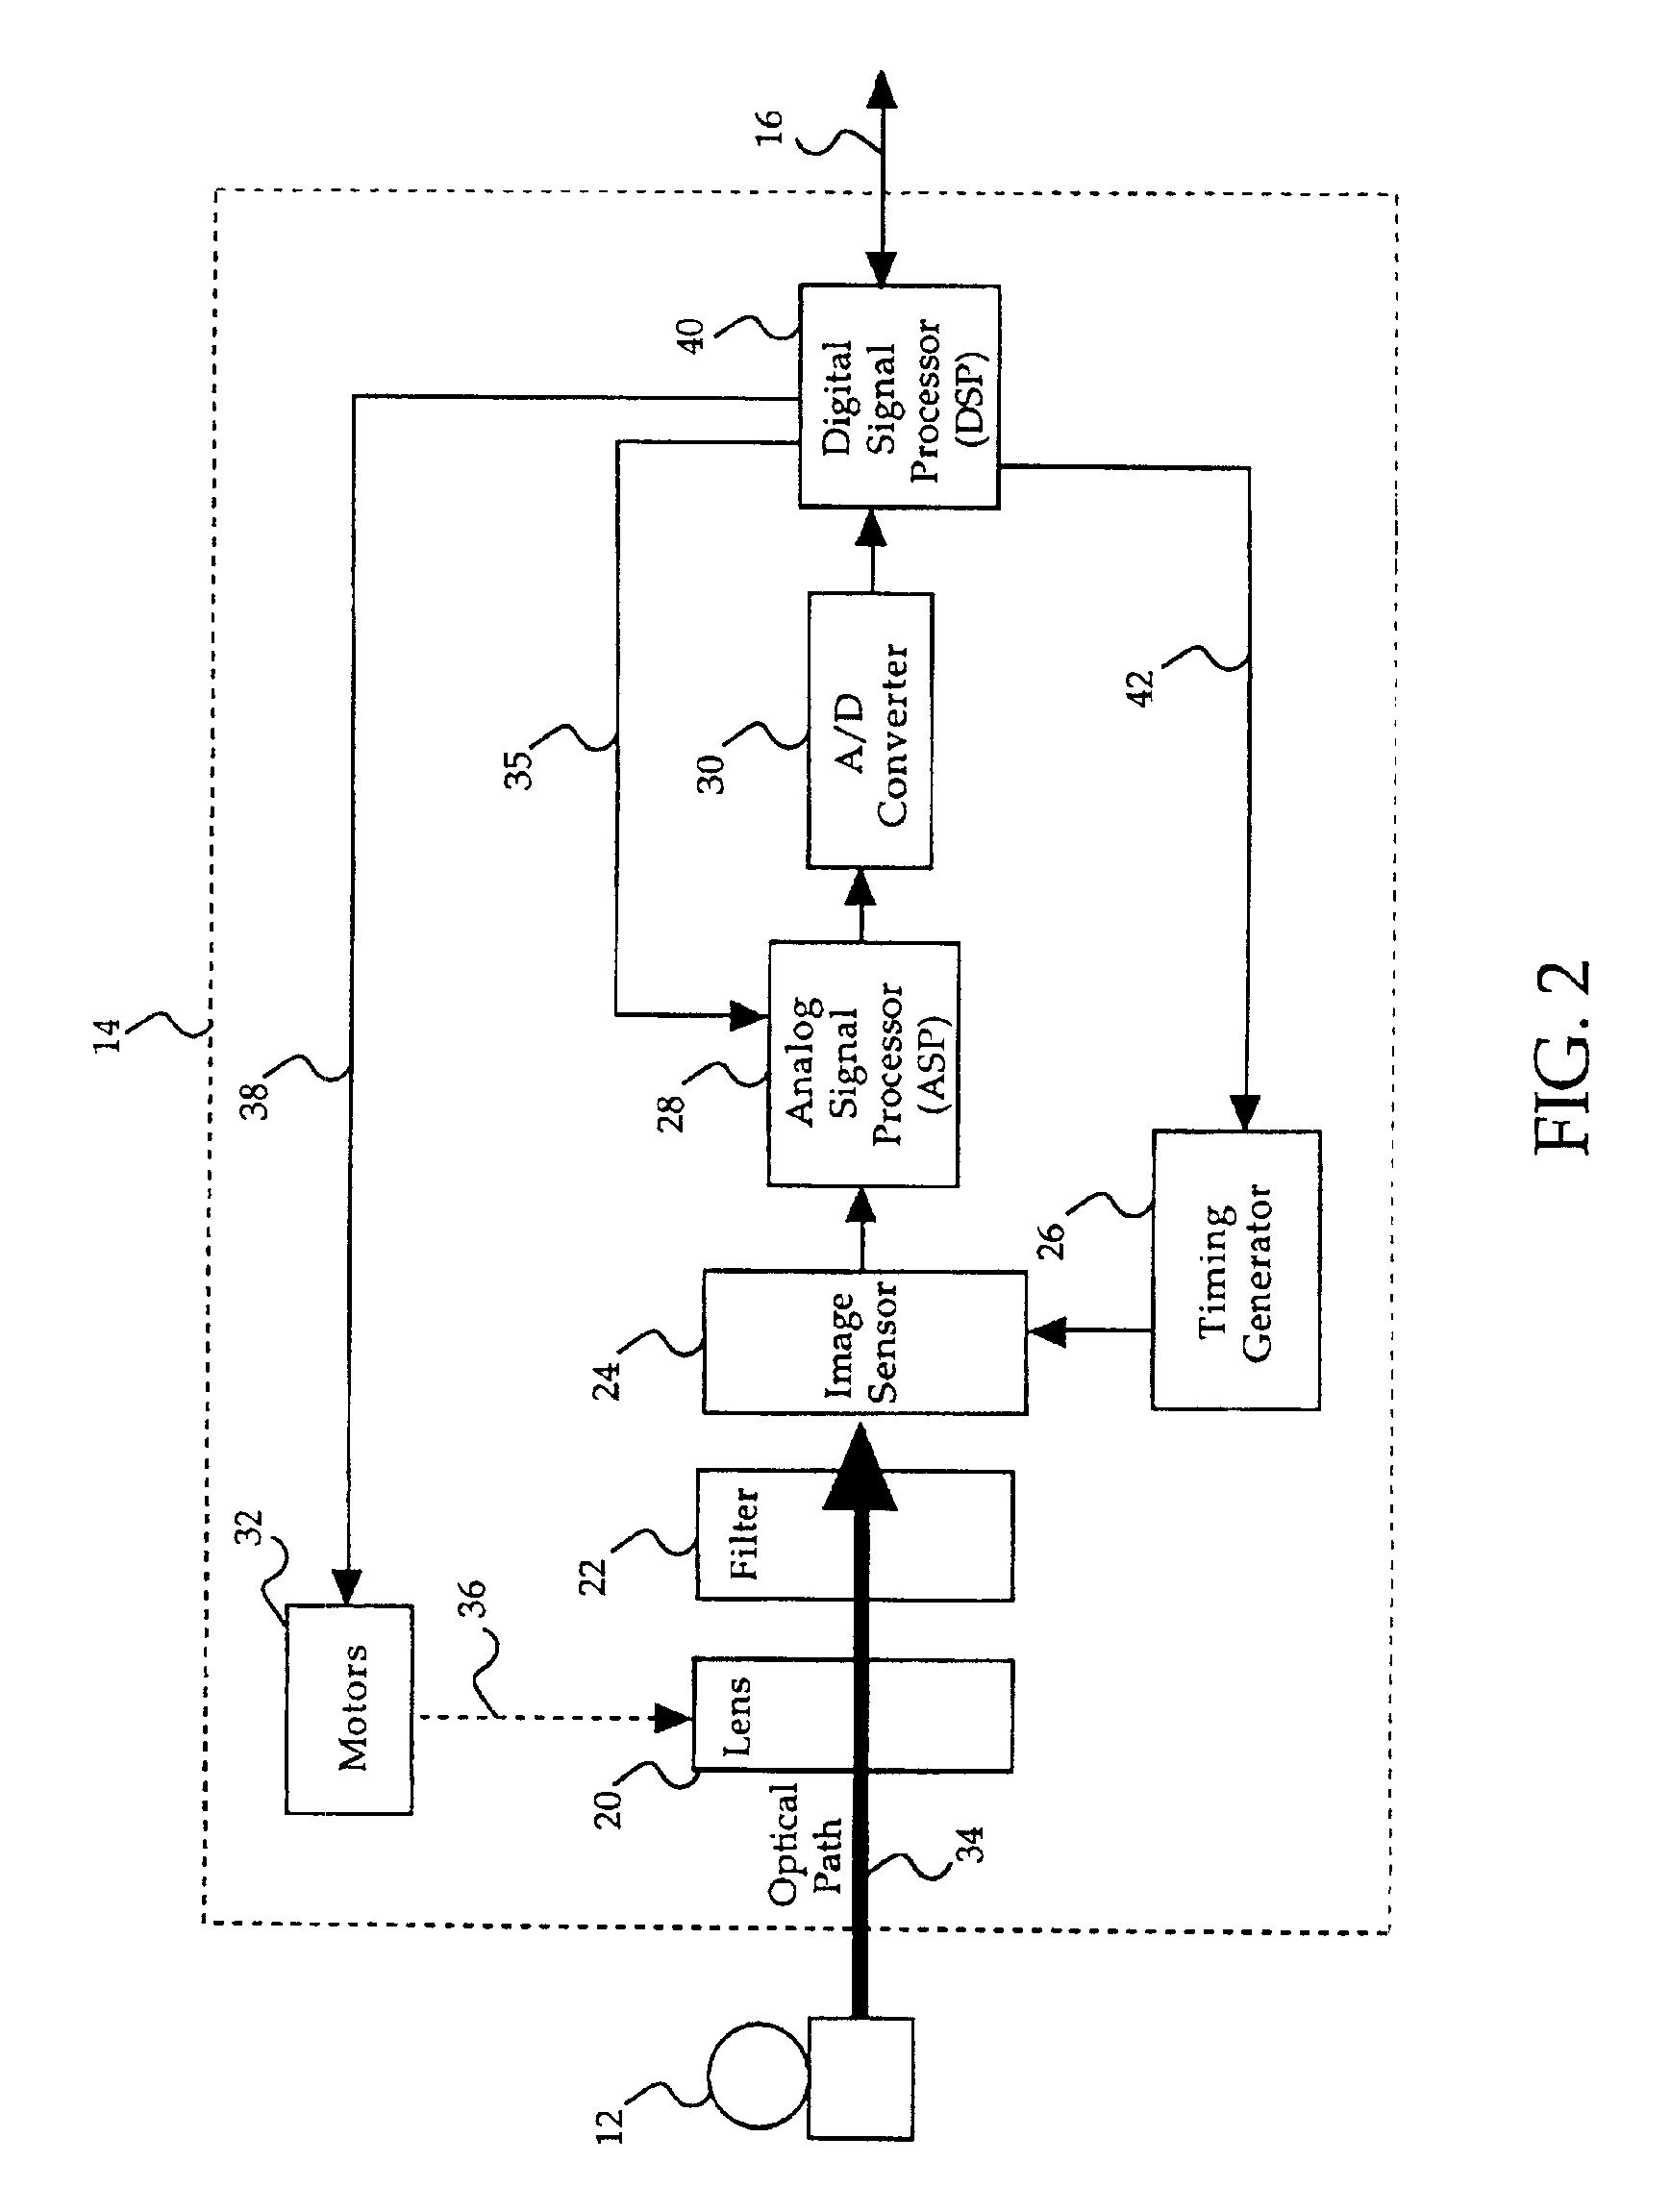 Apparatus and method for increasing a digital camera image capture rate by delaying image processing